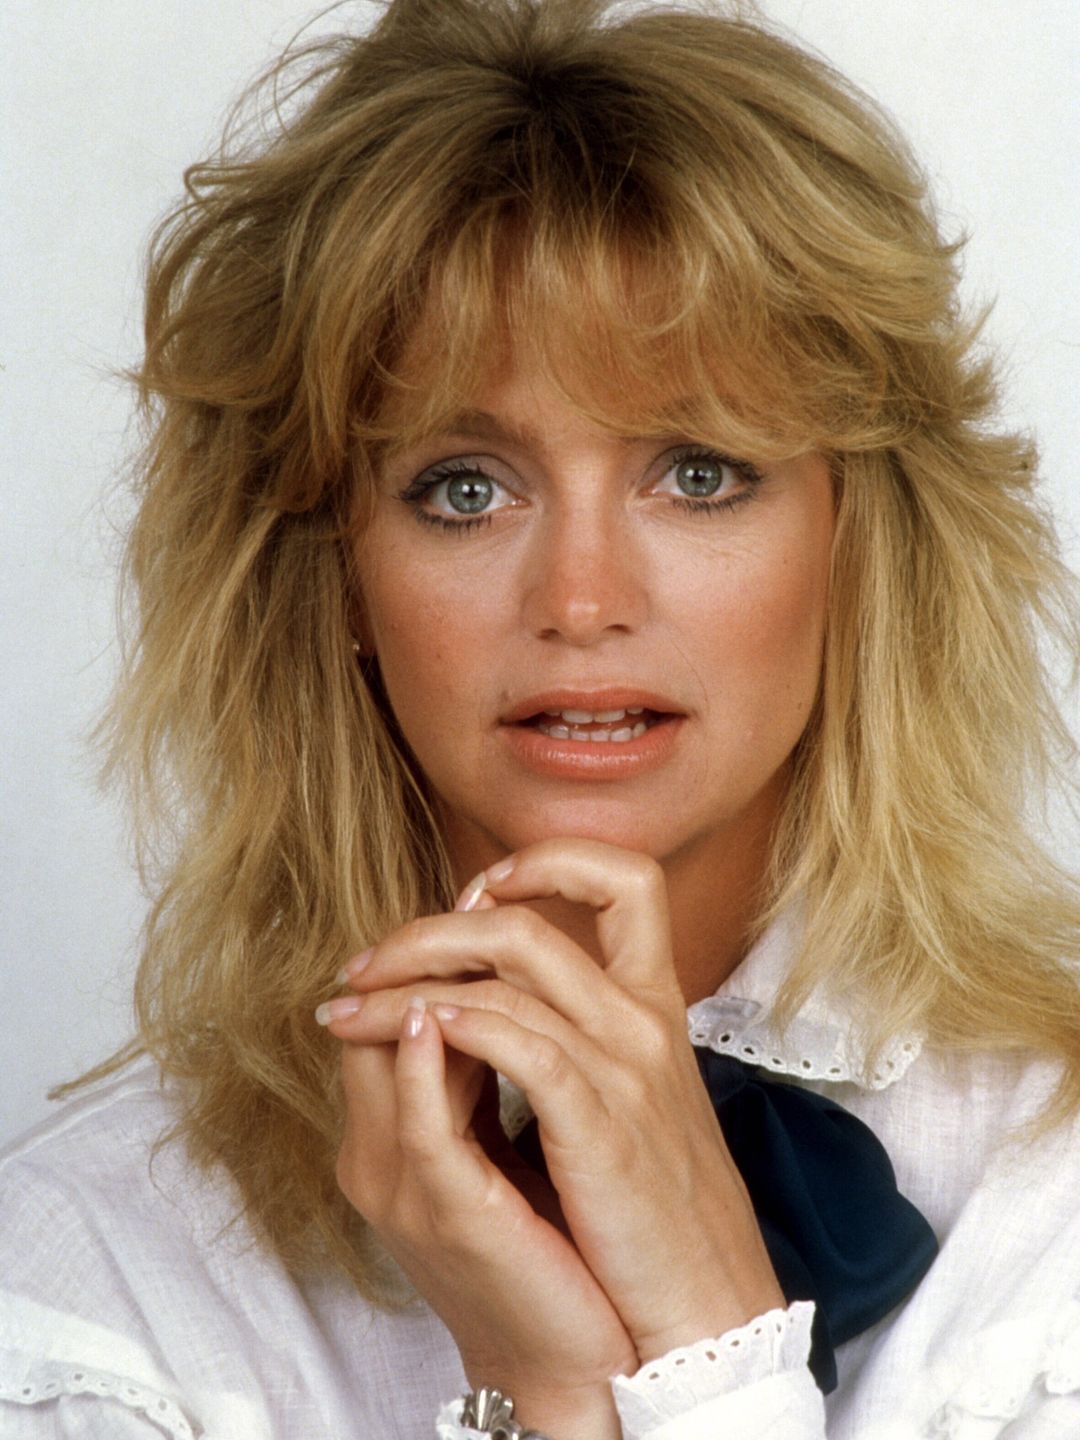 Goldie Hawn who is she